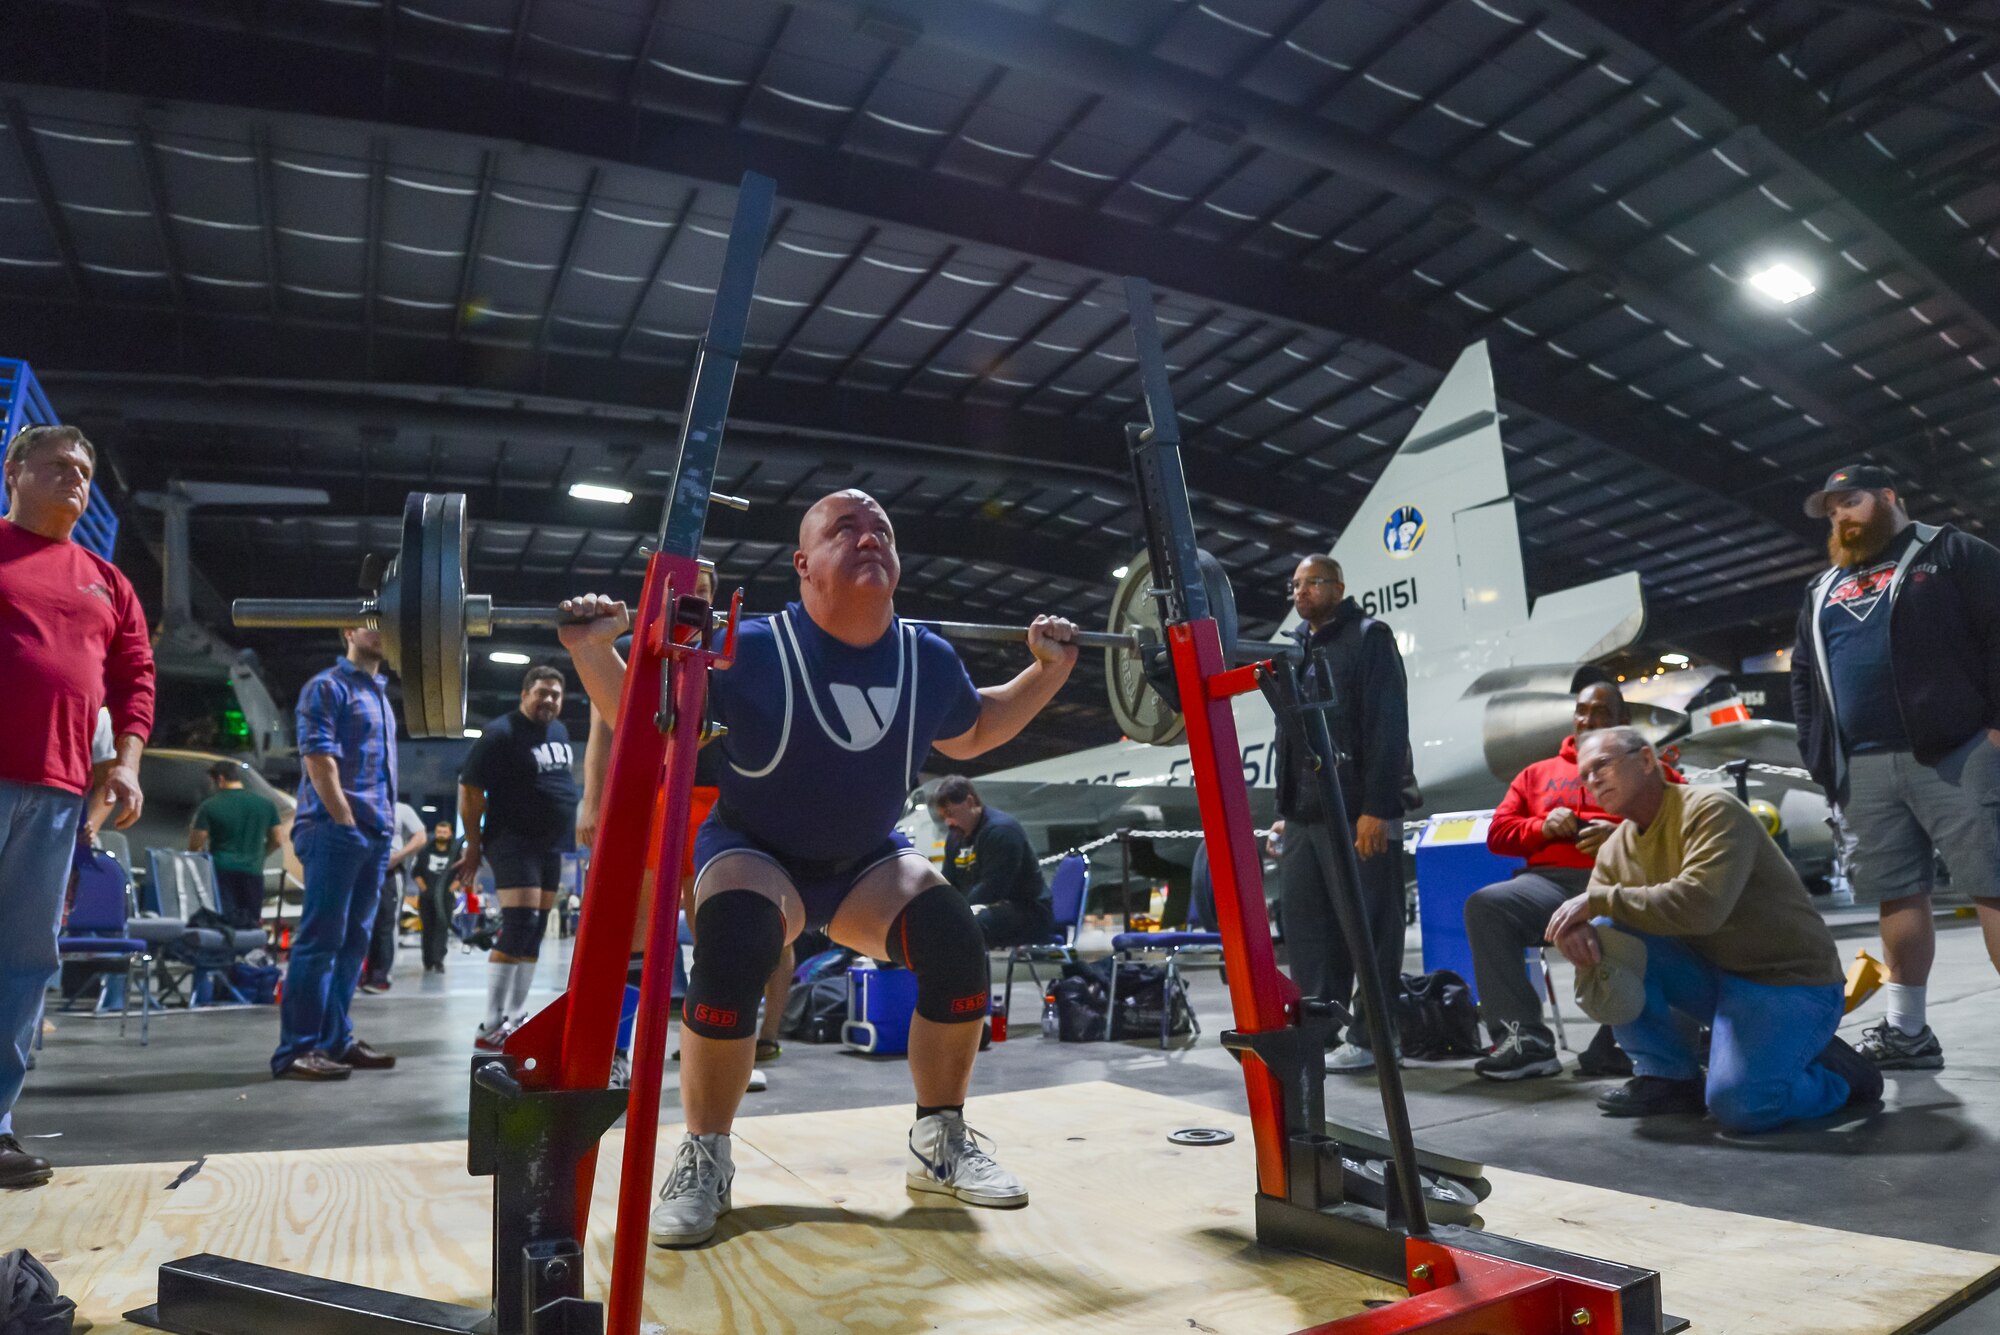 U.S. Air Force Tech. Sgt. Michael Lloyd of the 165th Airlift Wing, Georgia Air National Guard practices a squat, Jan. 25, 2014, at the Museum of Aviation in Warner Robins, Ga. Lloyd broke four U.S.A. Powerlifting Georgia state records at the 2014 Winter Classic and Single Ply Invitational. He set a record for squat, bench press, three event total (squat, bench press, deadlift), and bench press only for the Masters Division in his weight class at his first powerlifting competition. (U.S. Air National Guard photo by Master Sgt. Charles Delano/Released)